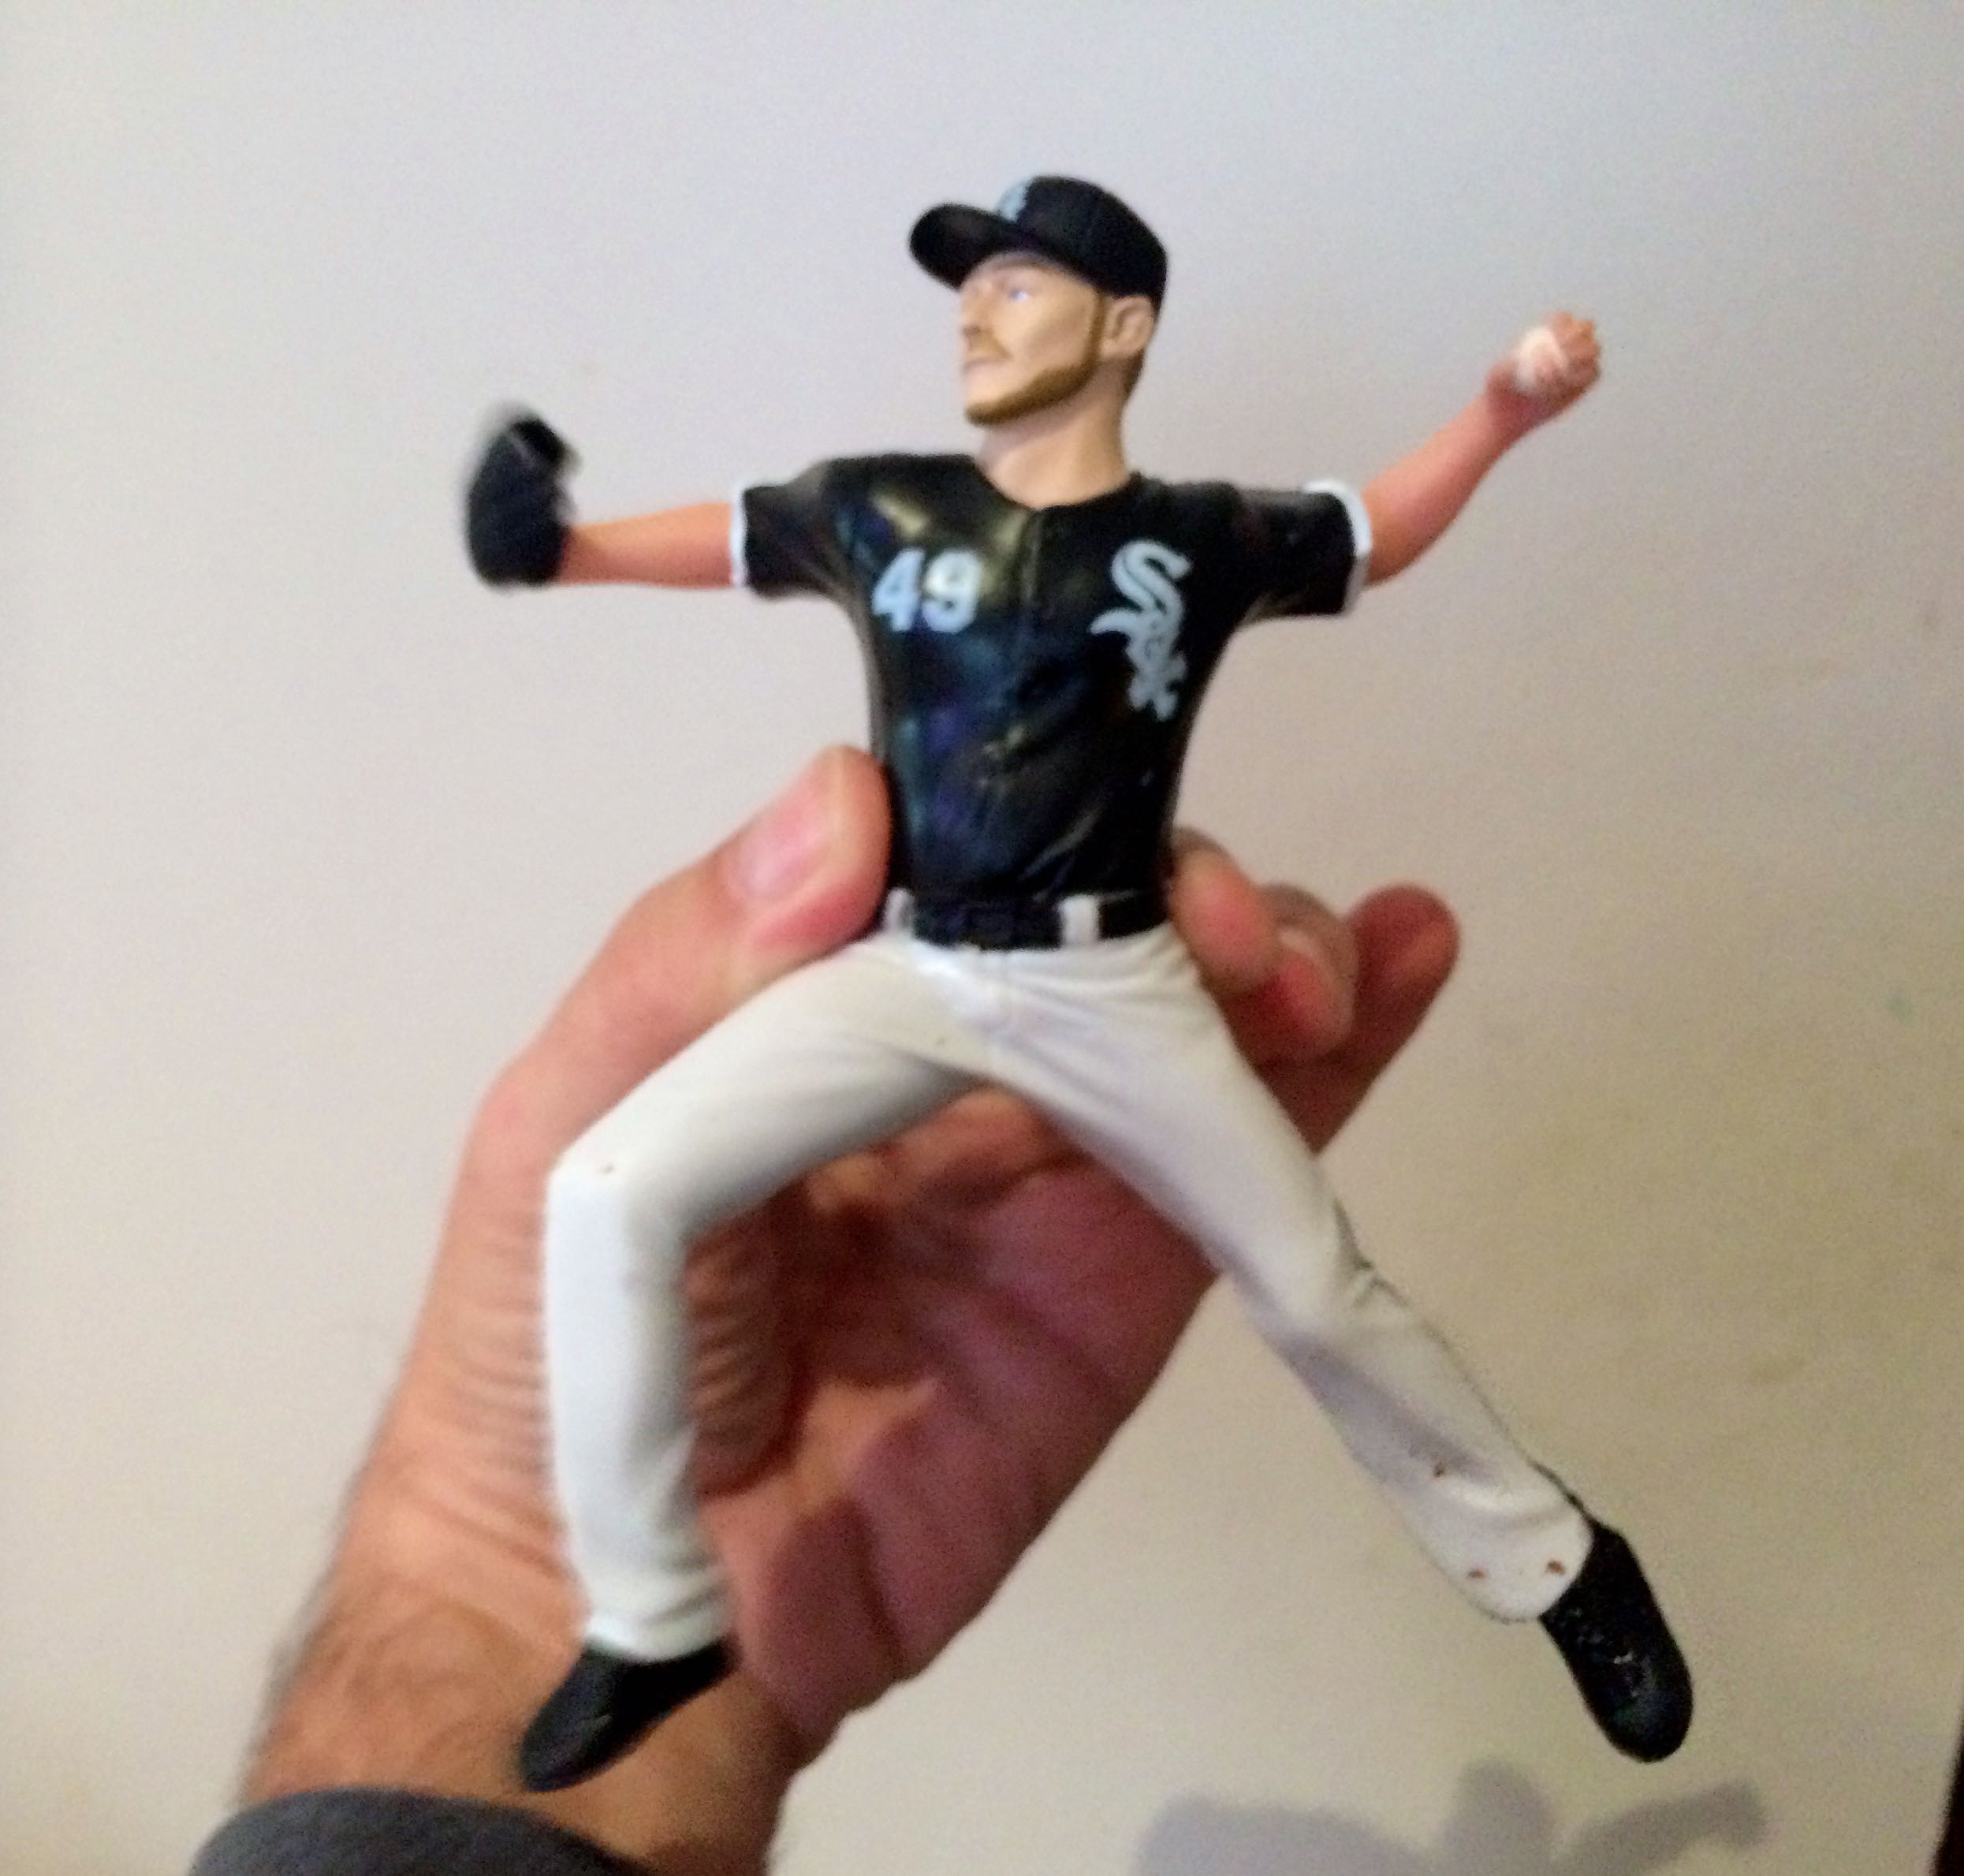 The Chris Sale action figure I got at last night's game -- words alone could never describe this stance.